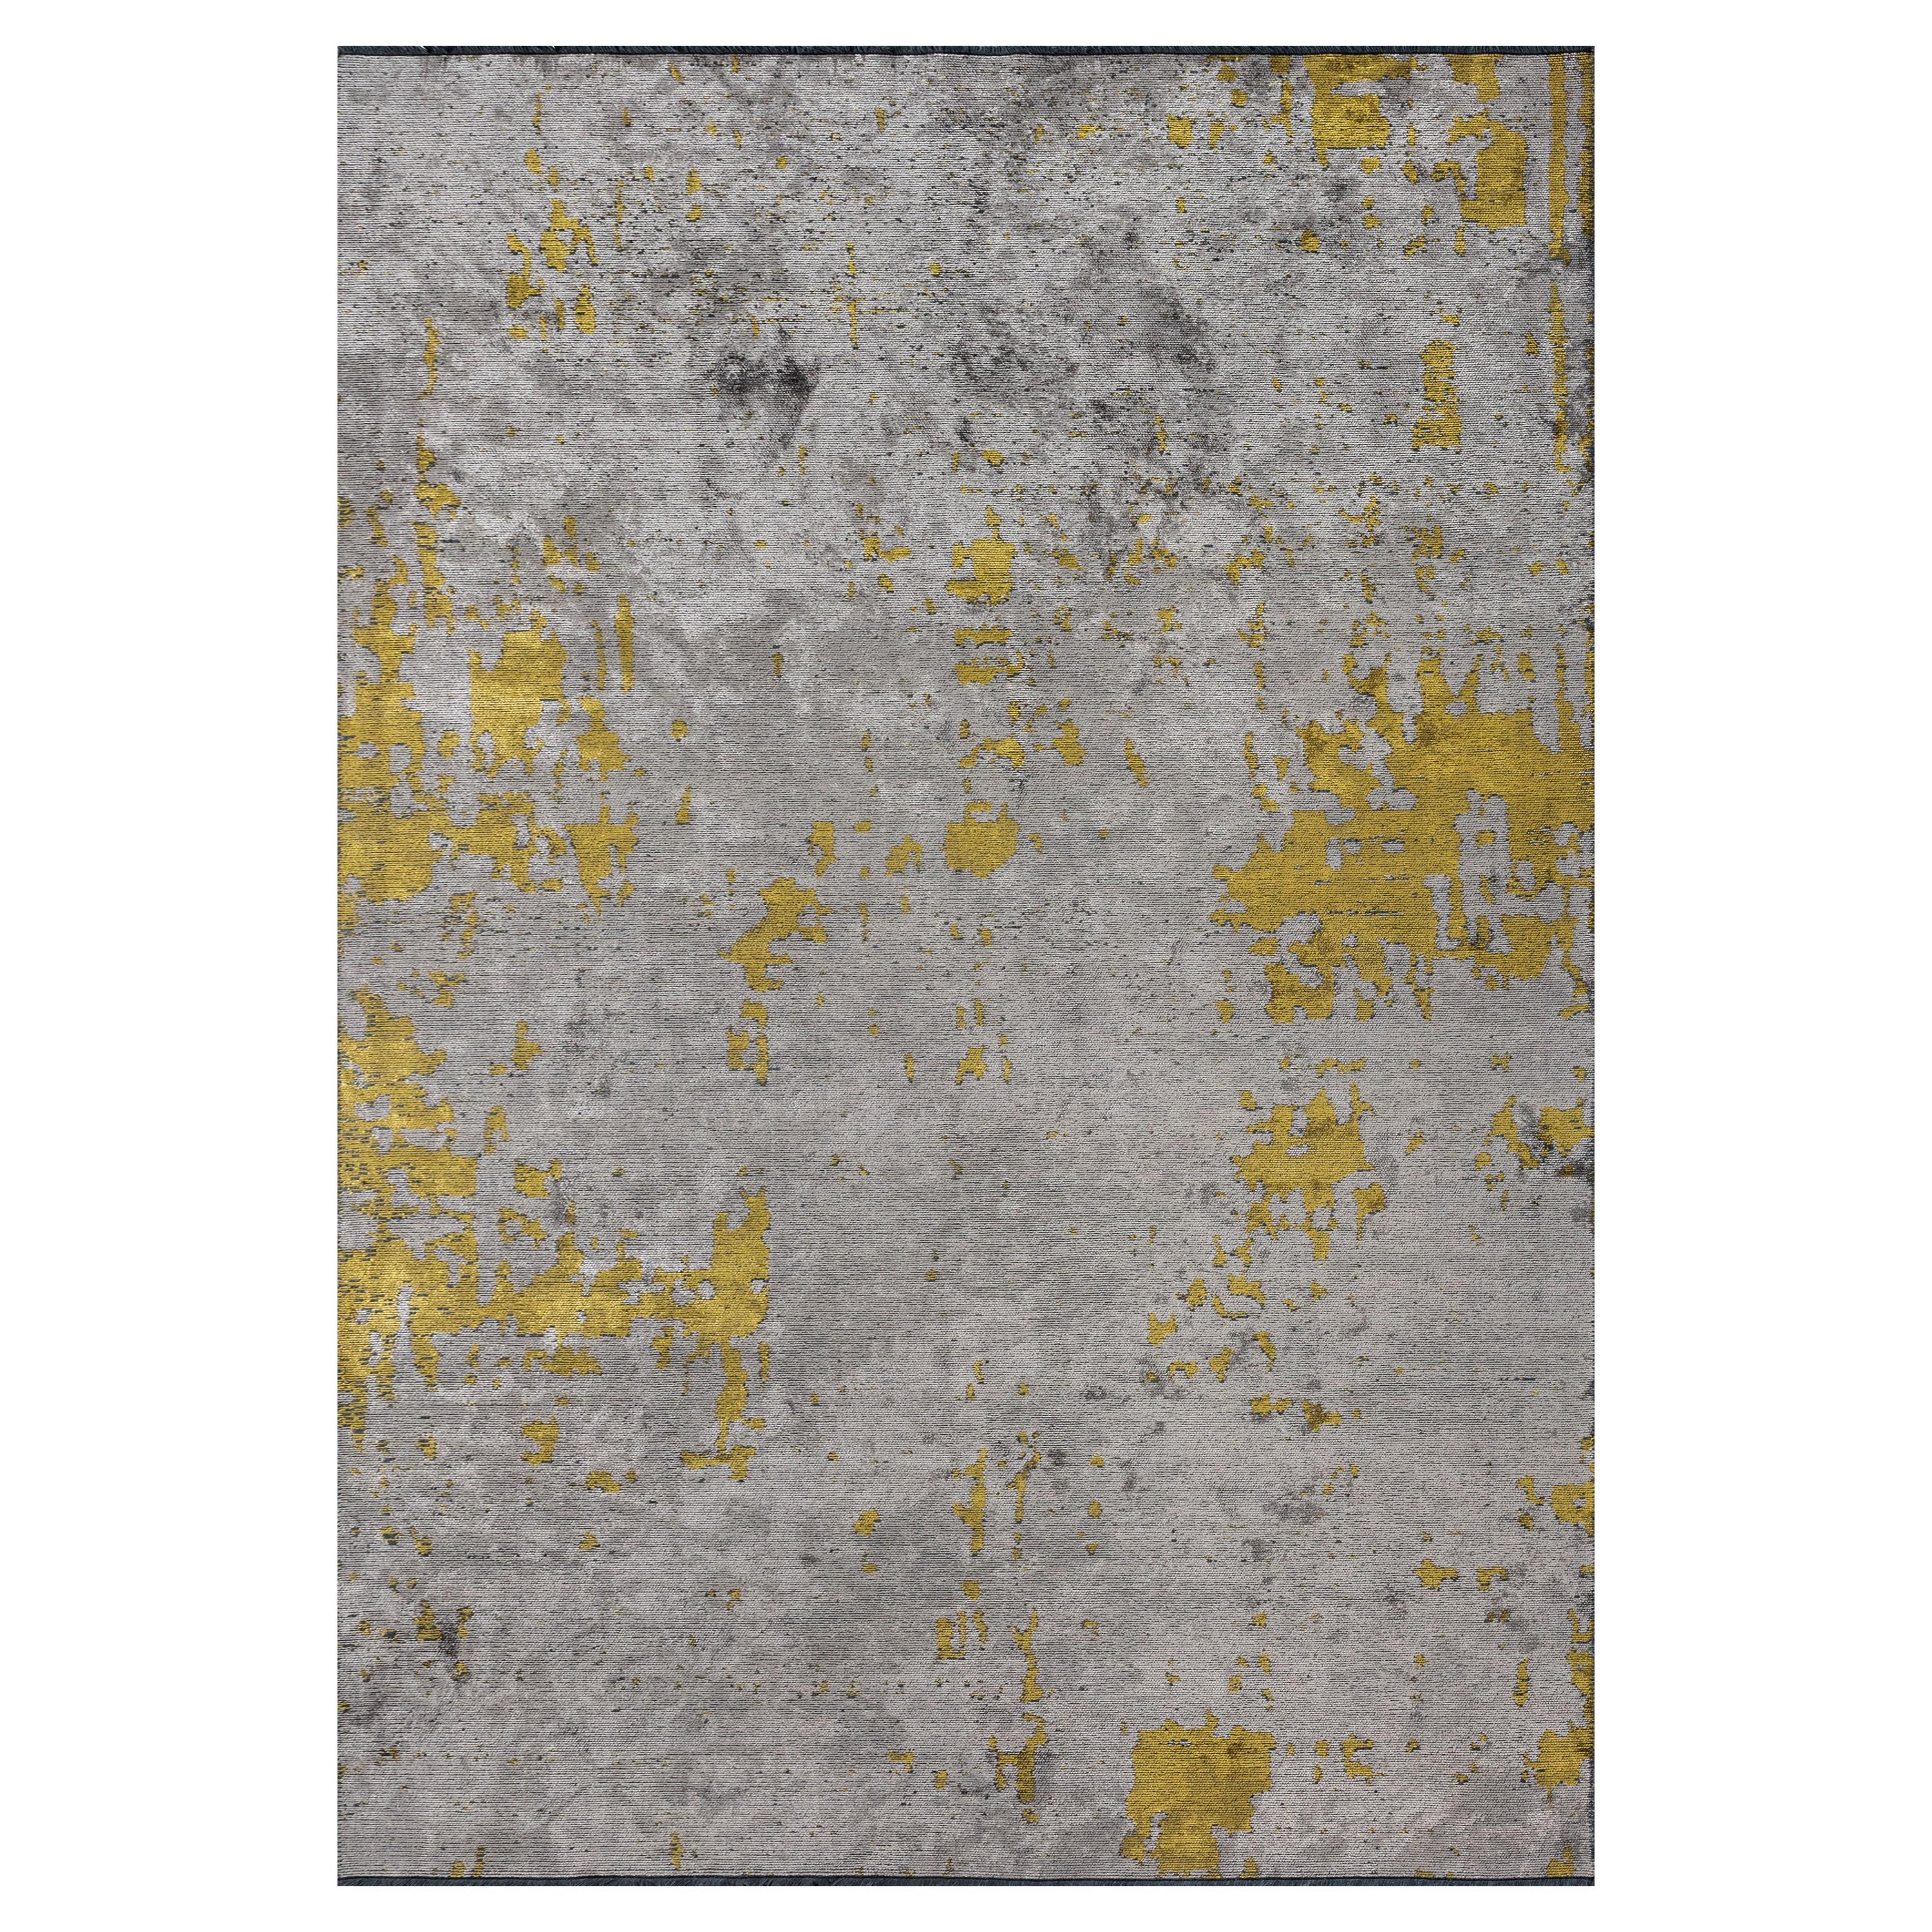 For Sale:  (Yellow) Modern Abstract Luxury Hand-Finished Area Rug